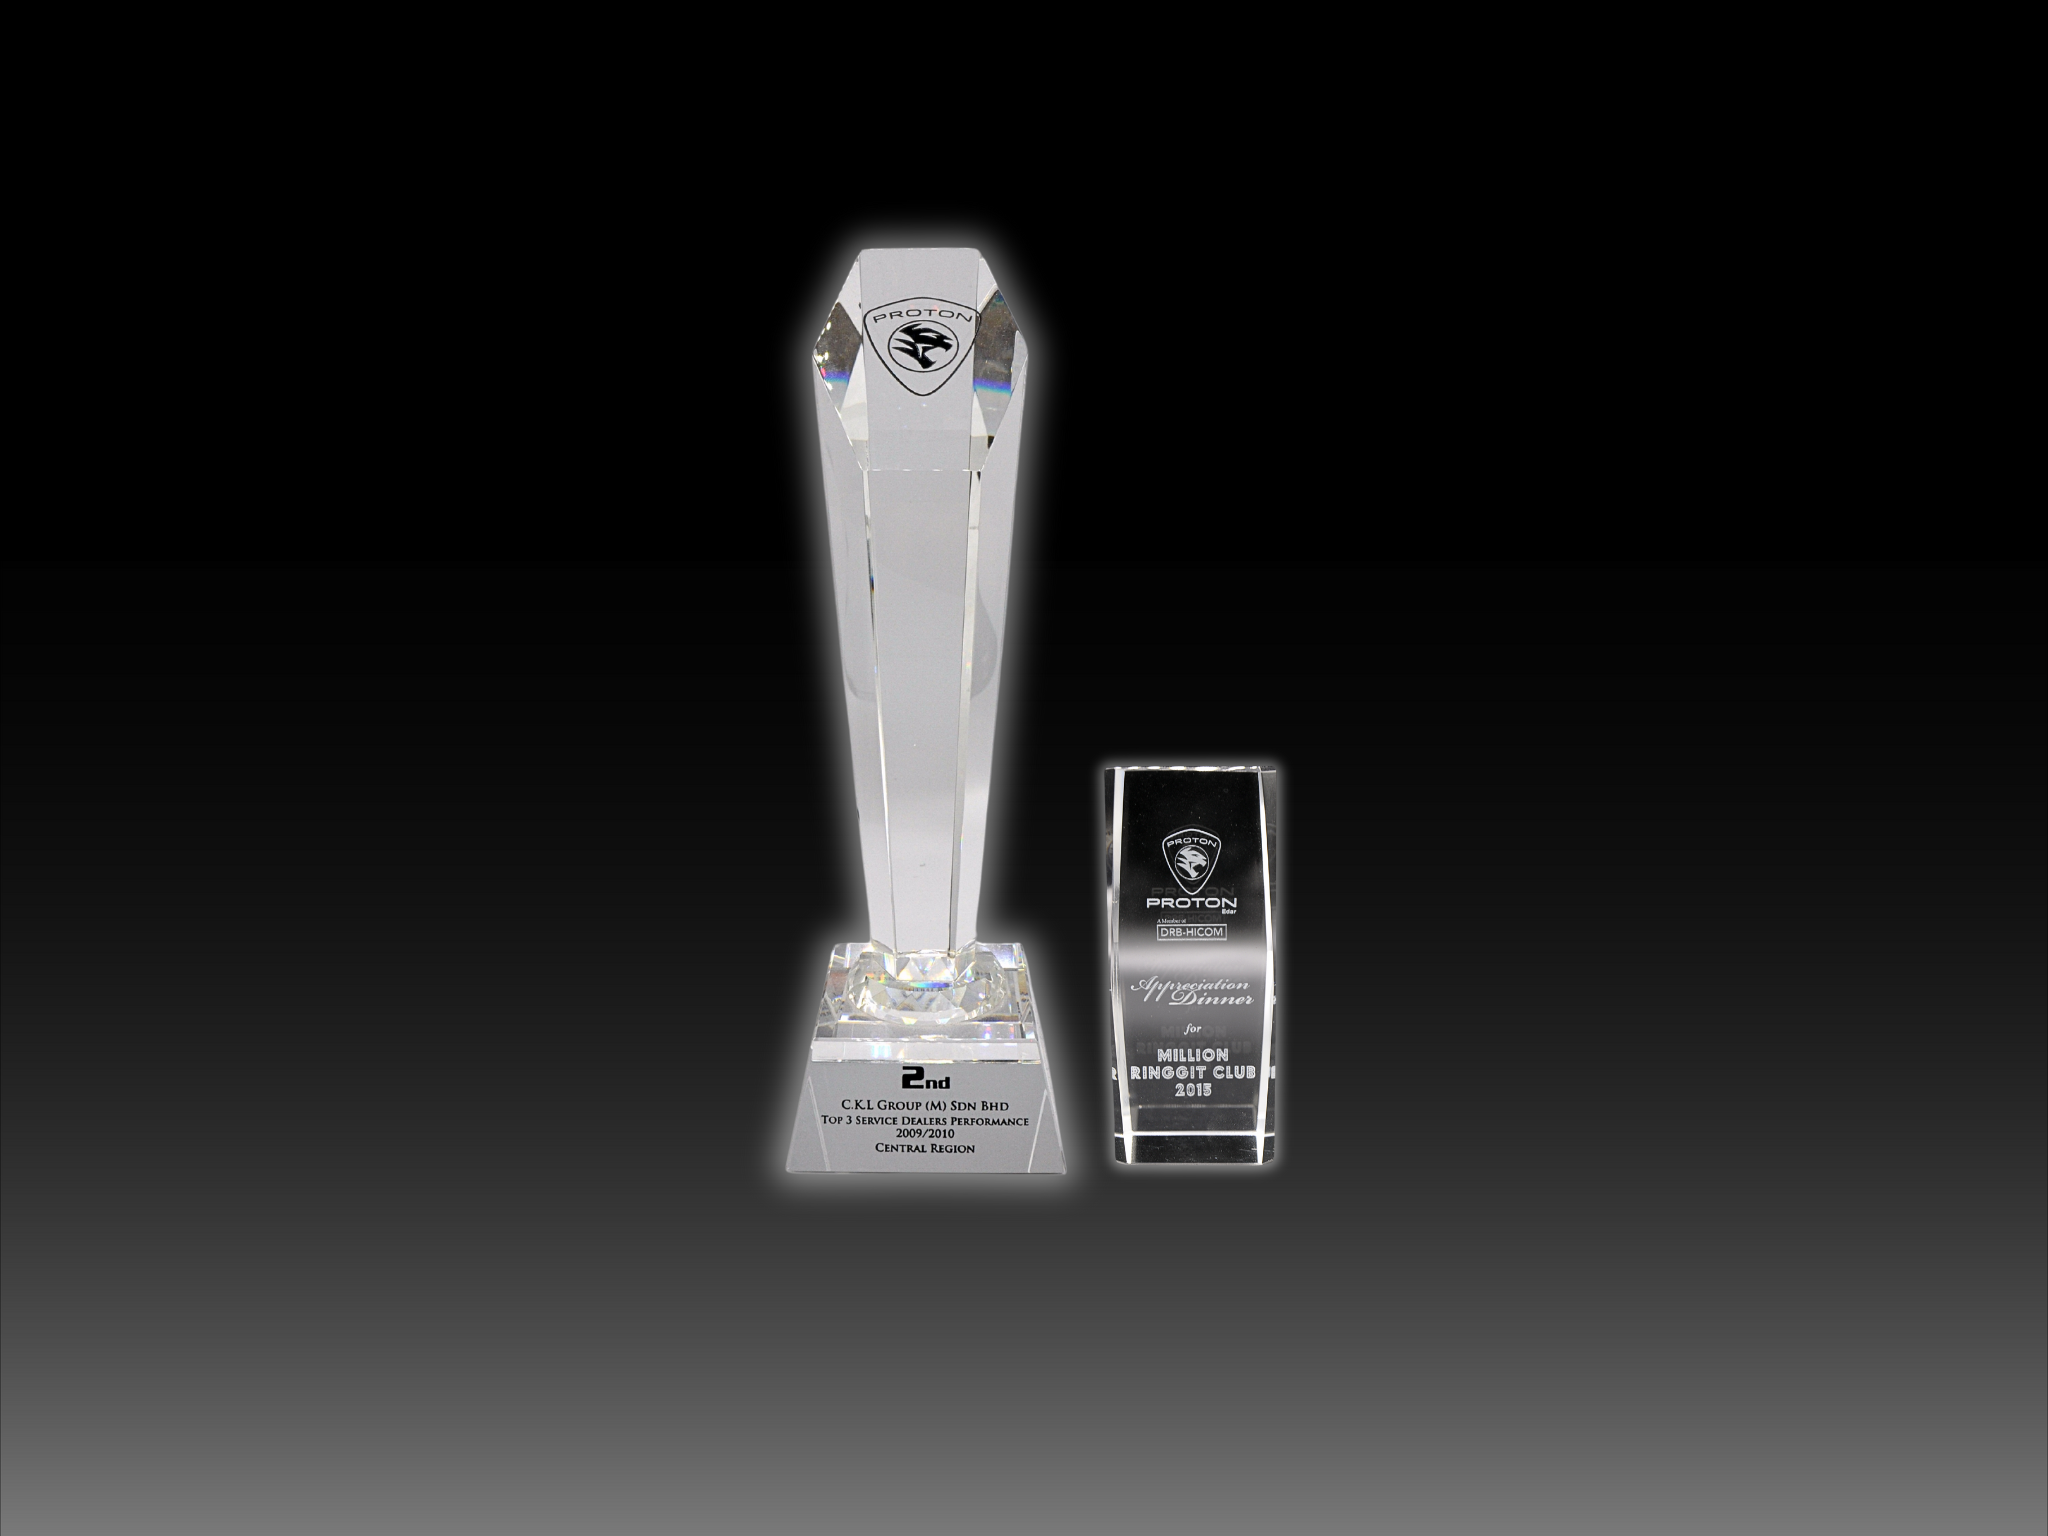 Proton Top 3 Service Dealers Performance Central Region 2009/2010 Award